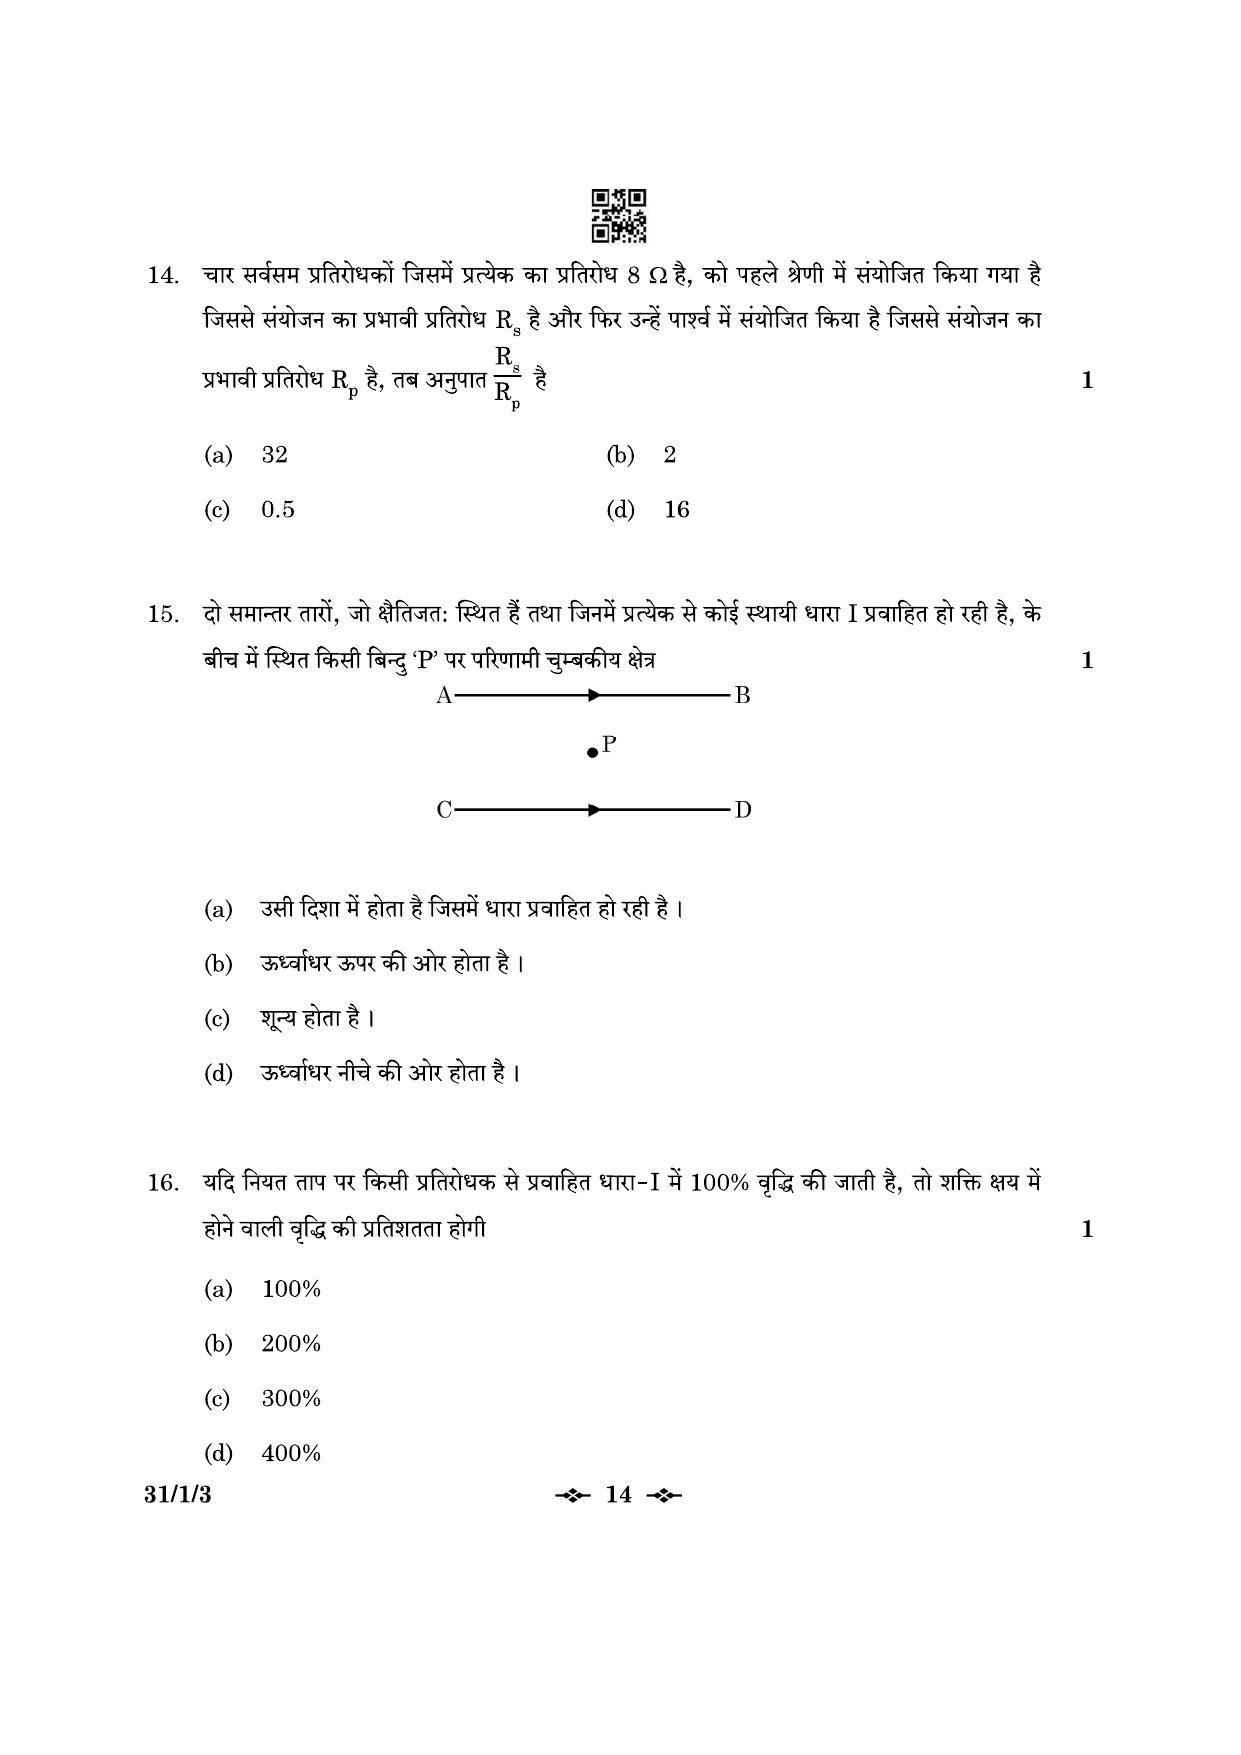 CBSE Class 10 31-1-3 Science 2023 Question Paper - Page 14